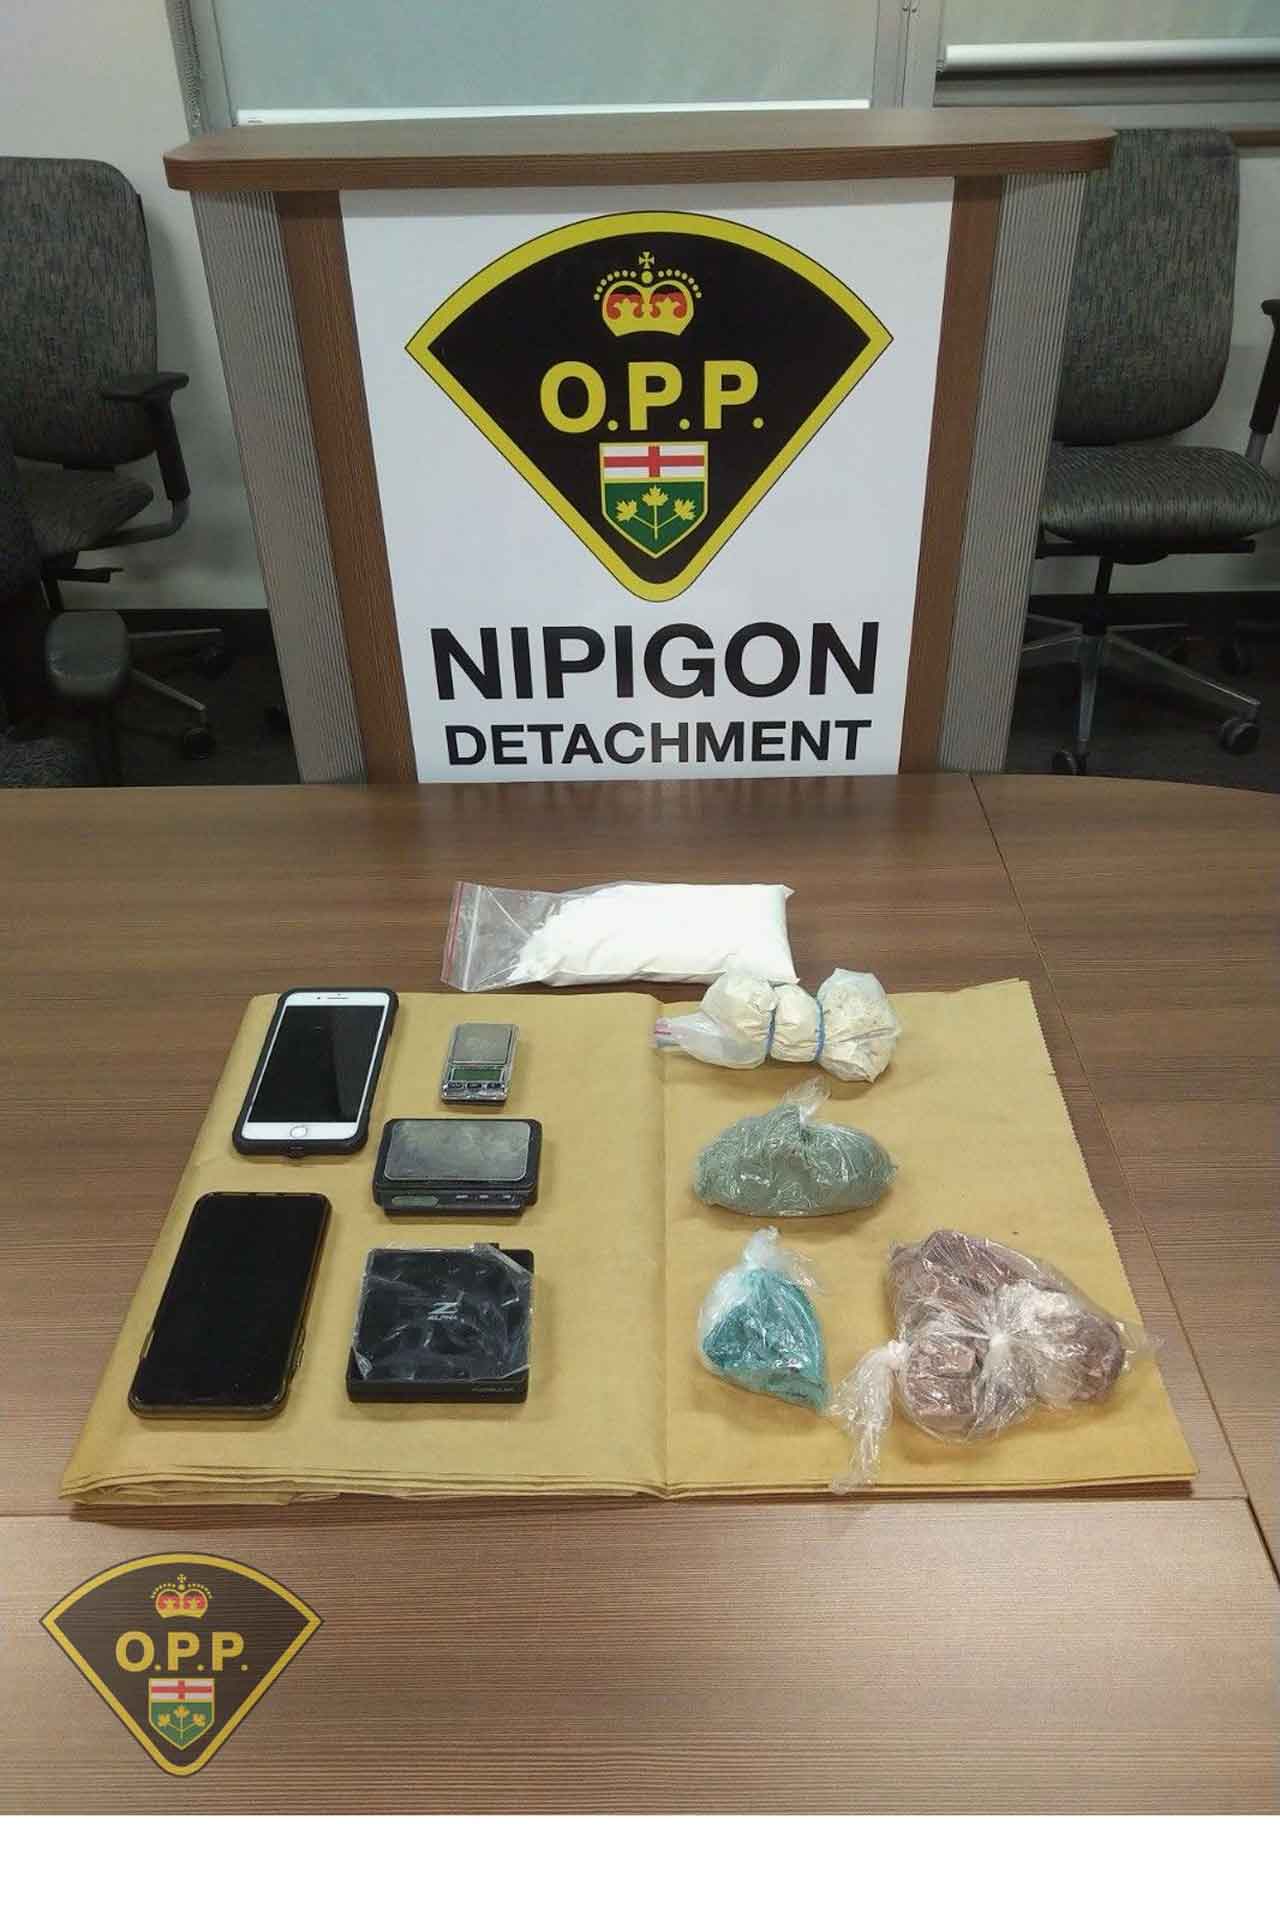 TRAFFIC STOP LEADS TO SIGNIFICANT DRUG SEIZURE IN NIPIGON